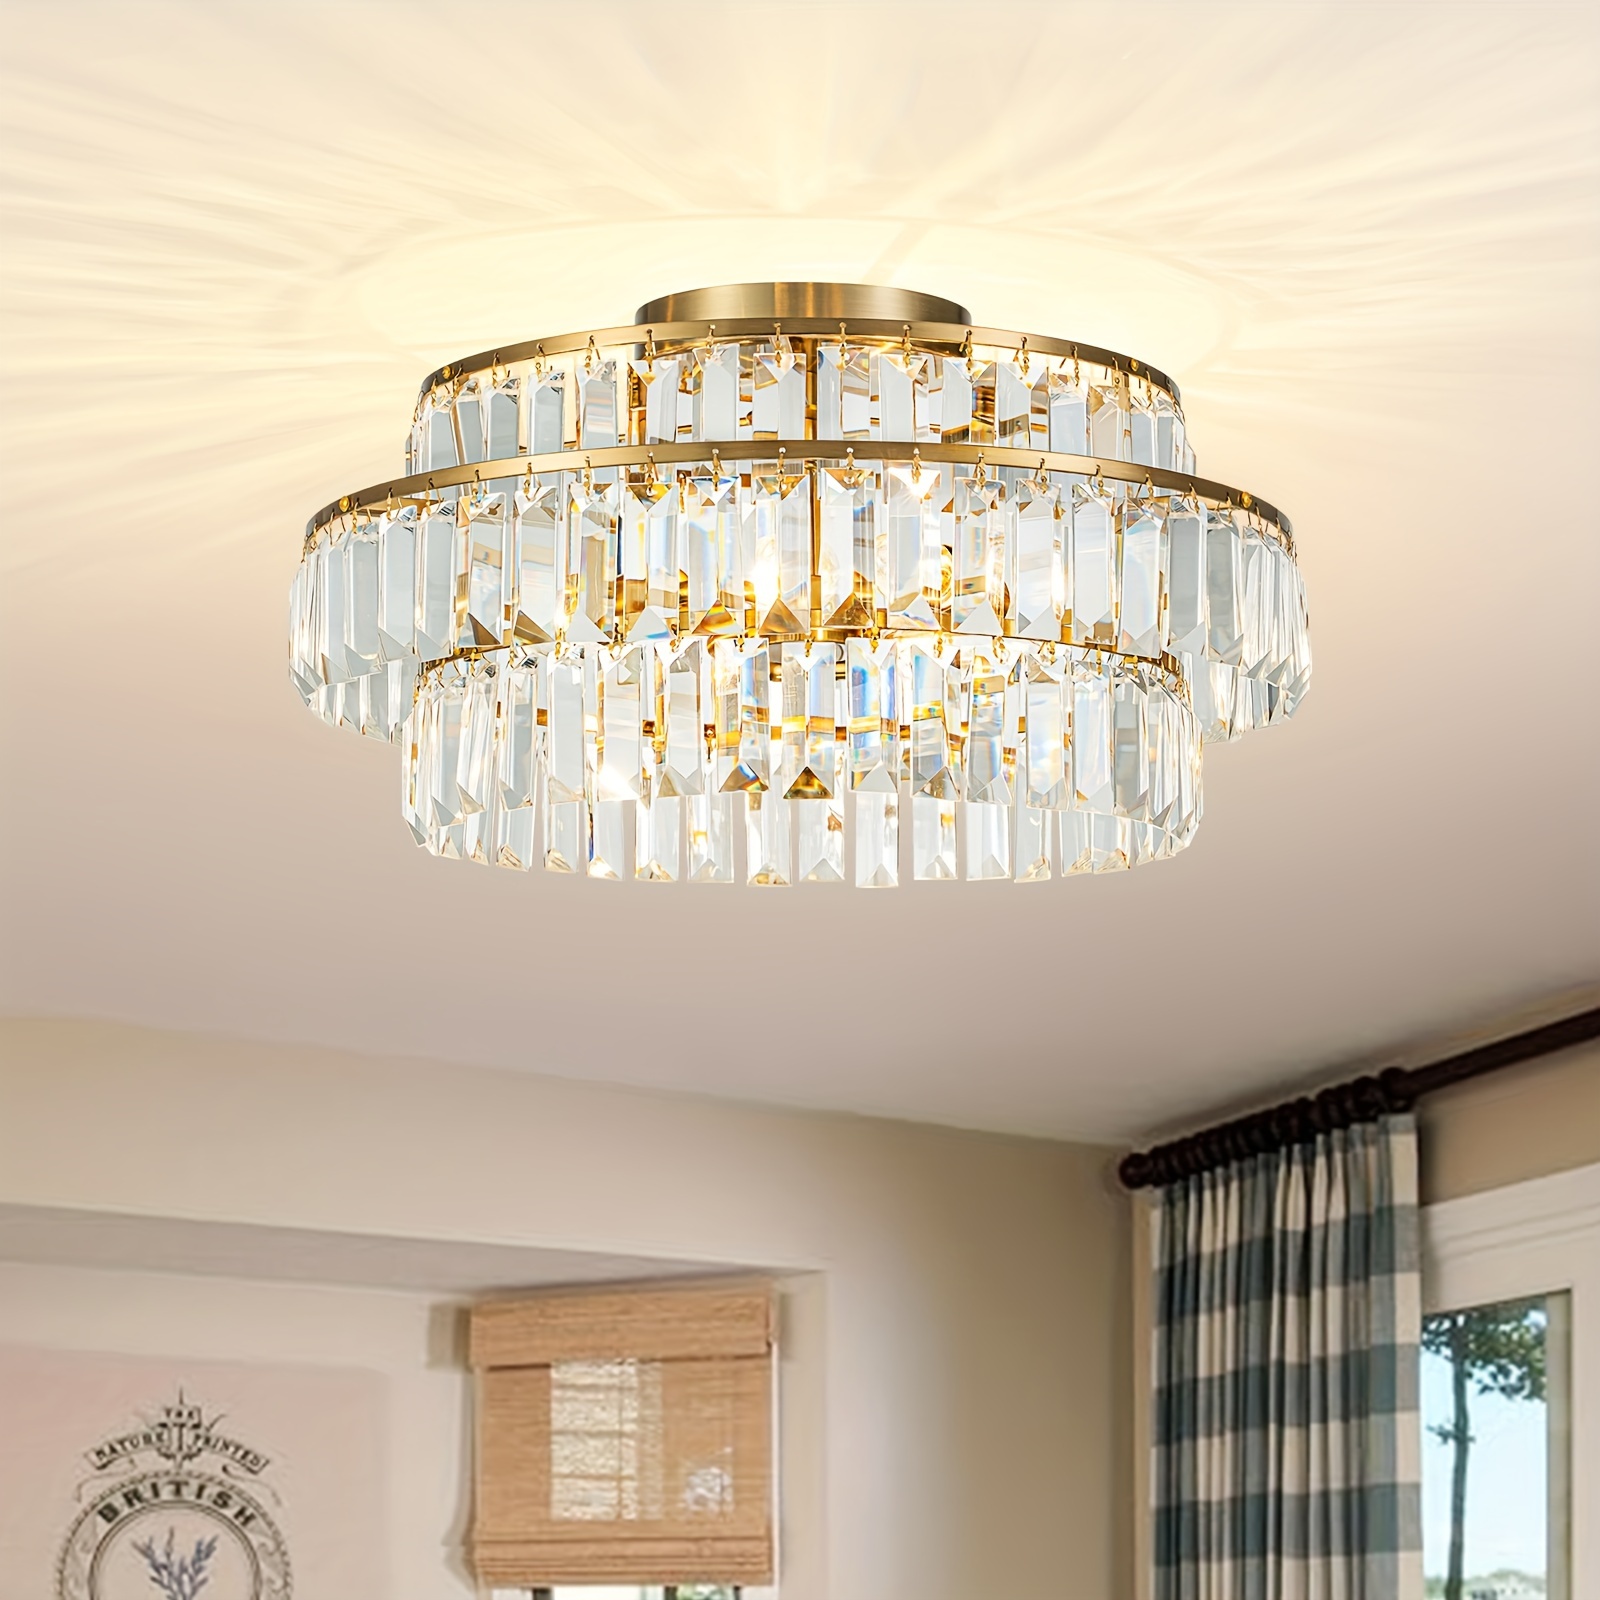 

Modern Crystal Ceiling Light Gold Black Optional 17.7inch Ceiling Light Fixture 3 Level Dimmable E12 Flat Chandelier Round Raindrop Living Room, Bedroom, Dining Room, Foyer, Kitchen Entrance